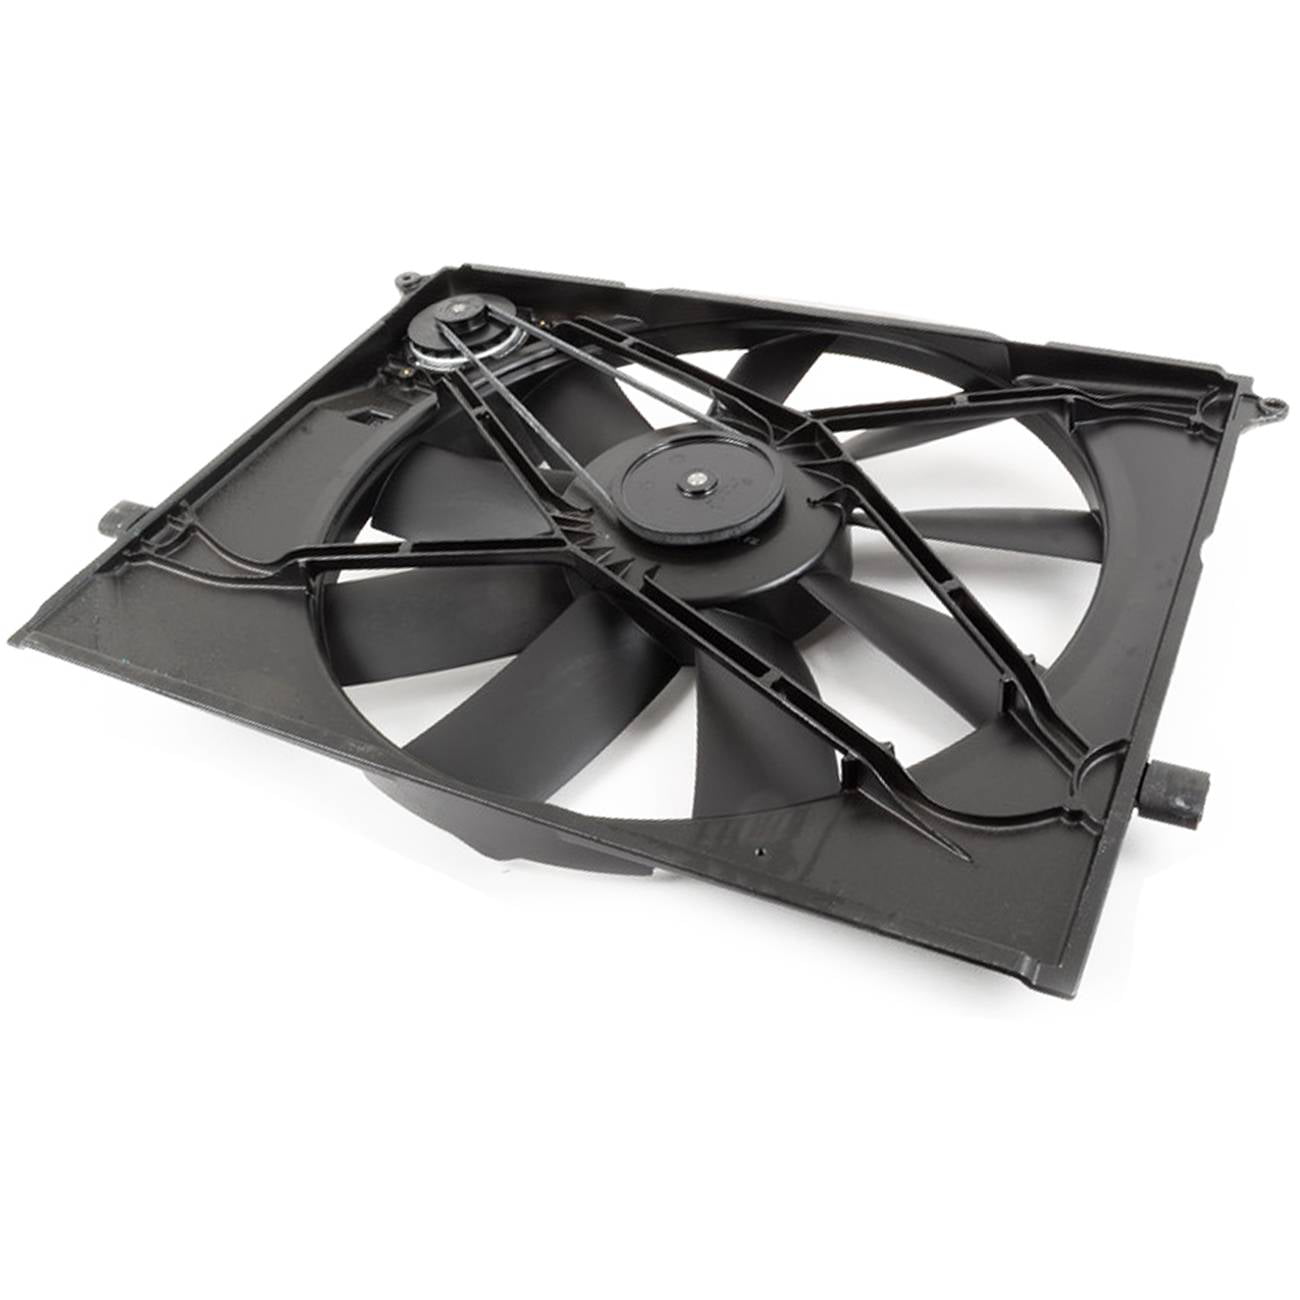 Bapmic 2205000093 Radiator Cooling Fan & Brushless Motor Compatible with Mercedes-Benz W220 CL500 CL55 S430 S500 